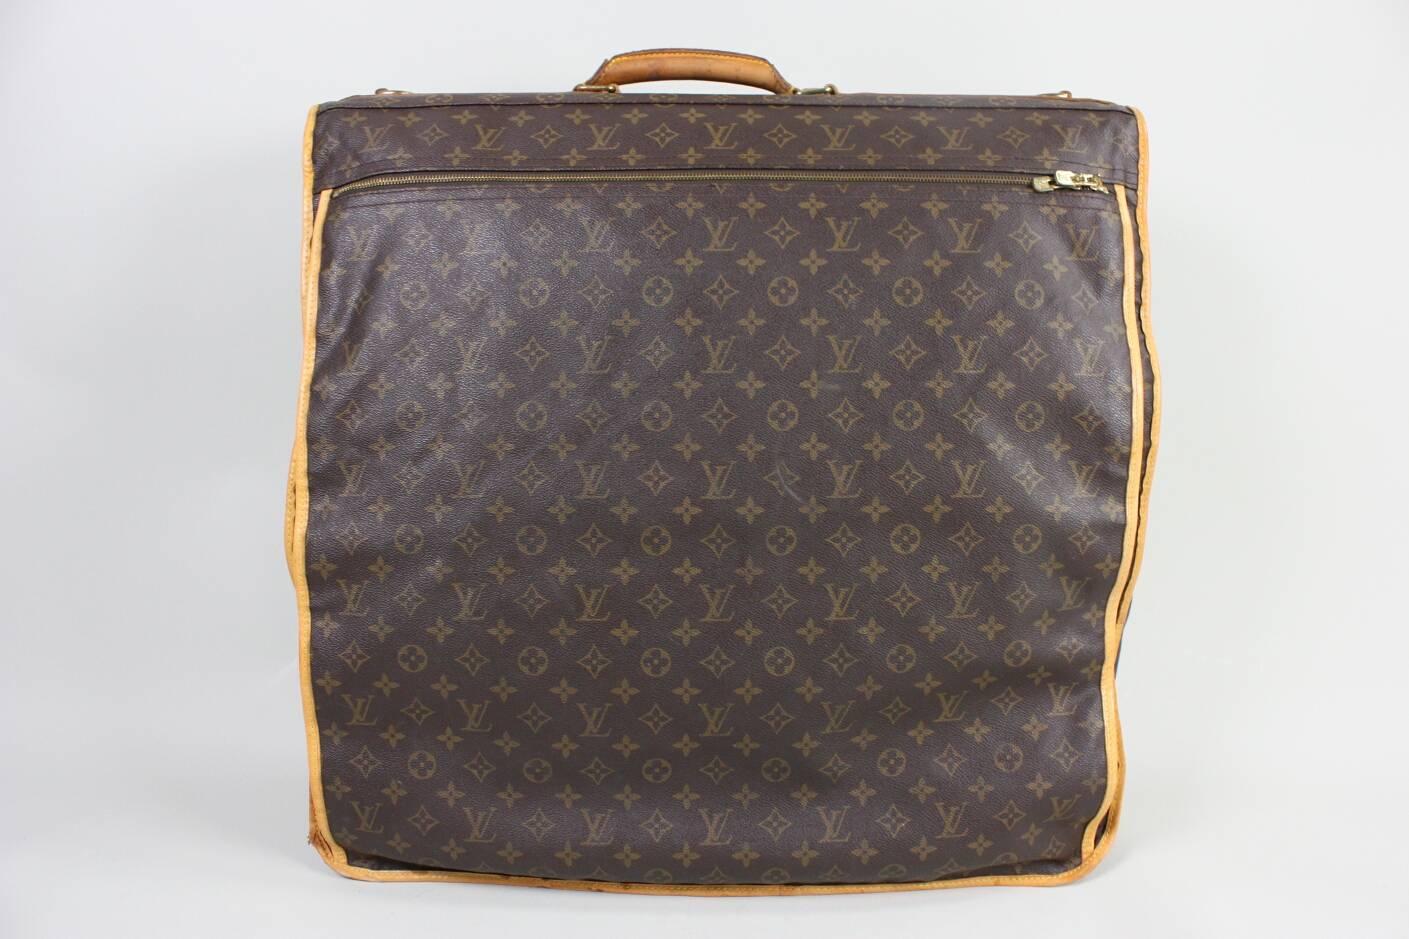 Vintage unisex Louis Vuitton garment carrier is made of brown and tan monogram coated canvas and dates to the 1990's.  It has brass hardware, tan vachetta leather trim, single rolled top handle and single exterior pocket with zip closure. Single